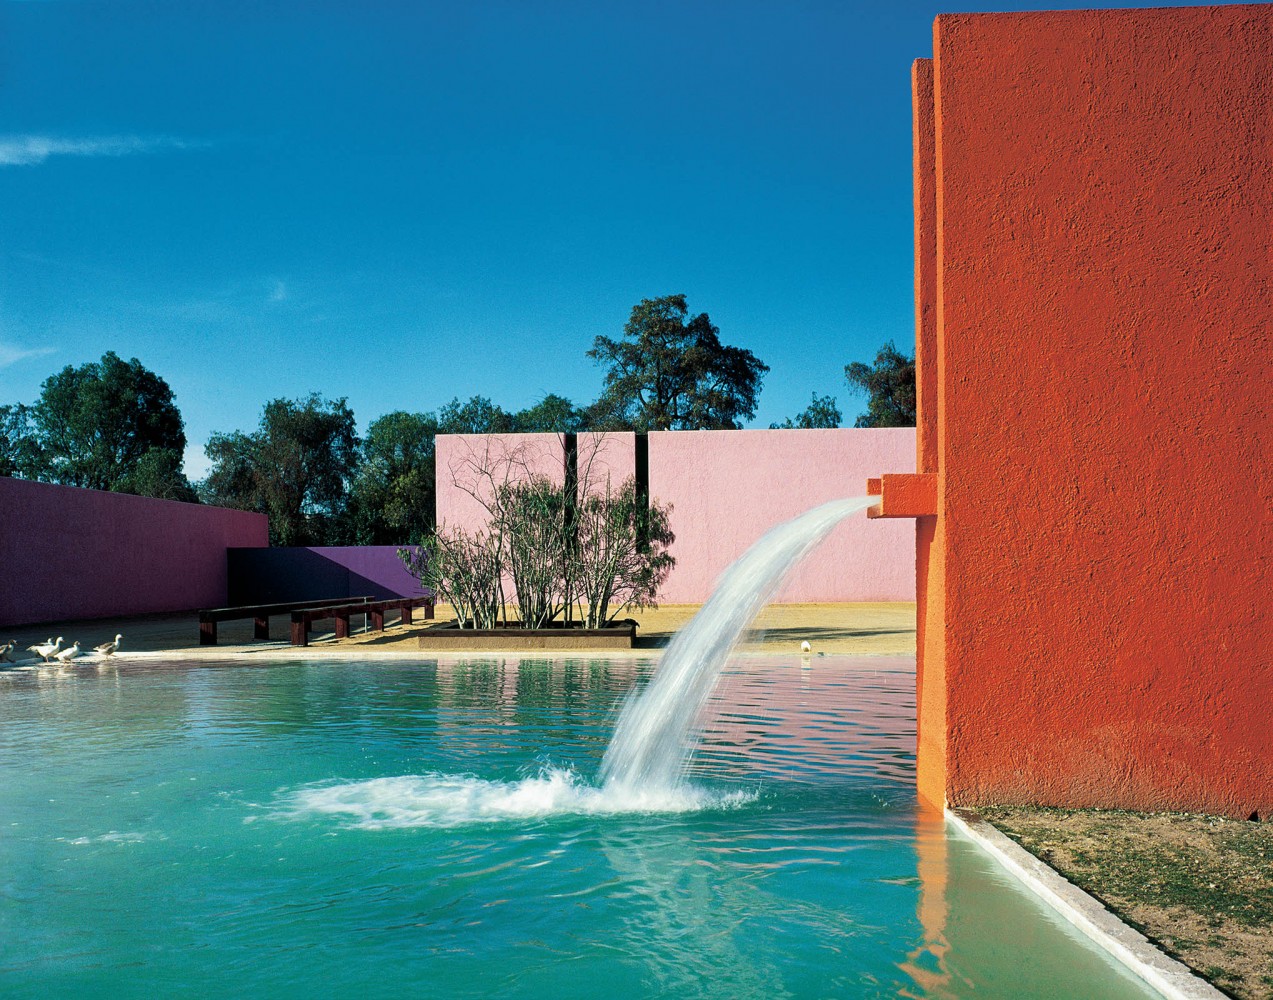 Luis Barragán, water and colour in architecture | Momocca